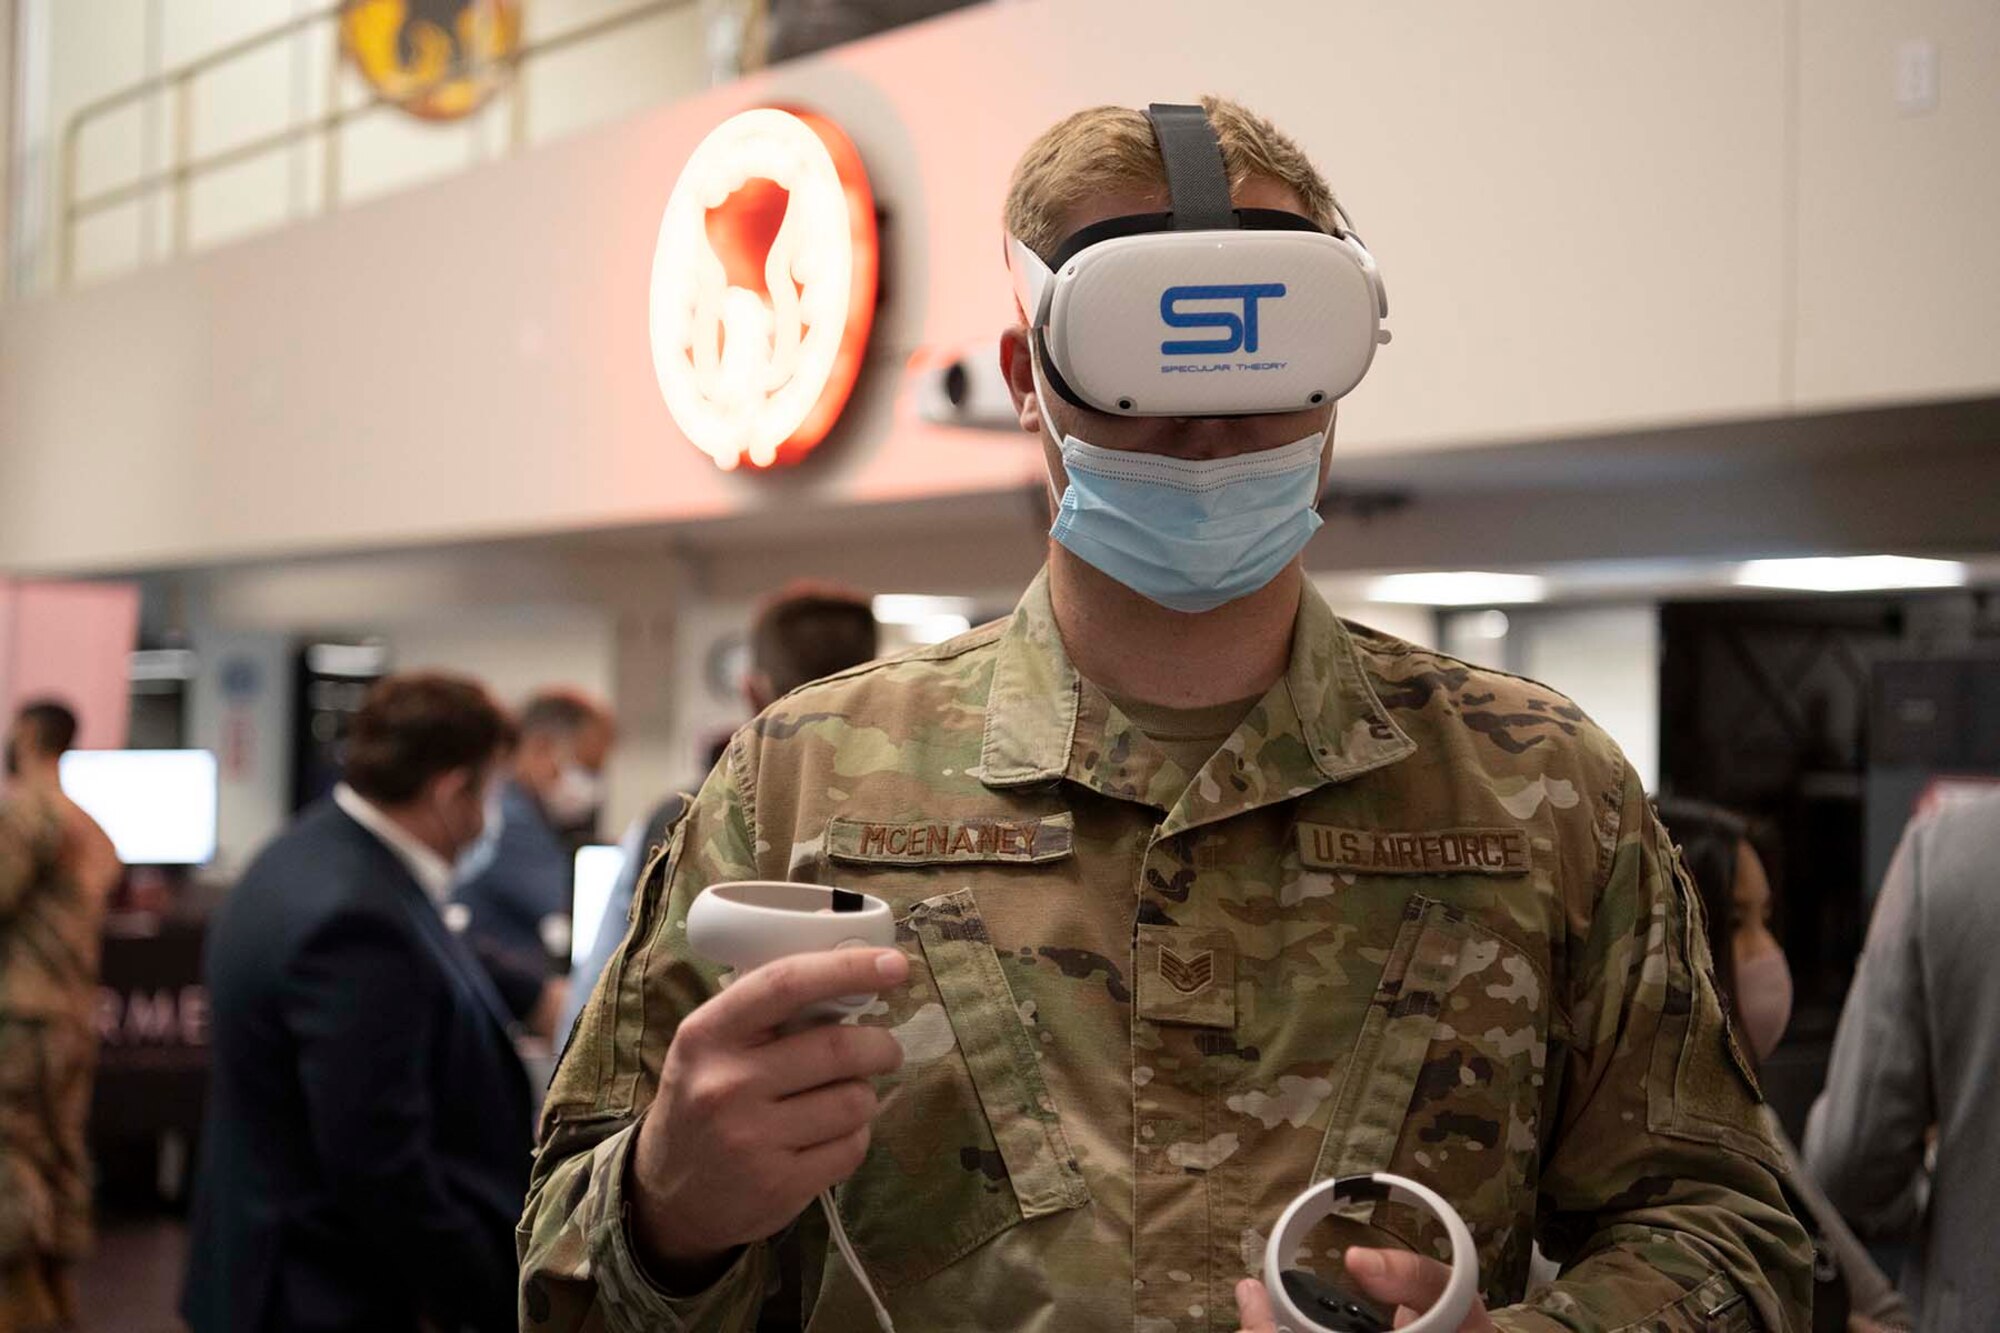 An Airman uses a virtual reality system